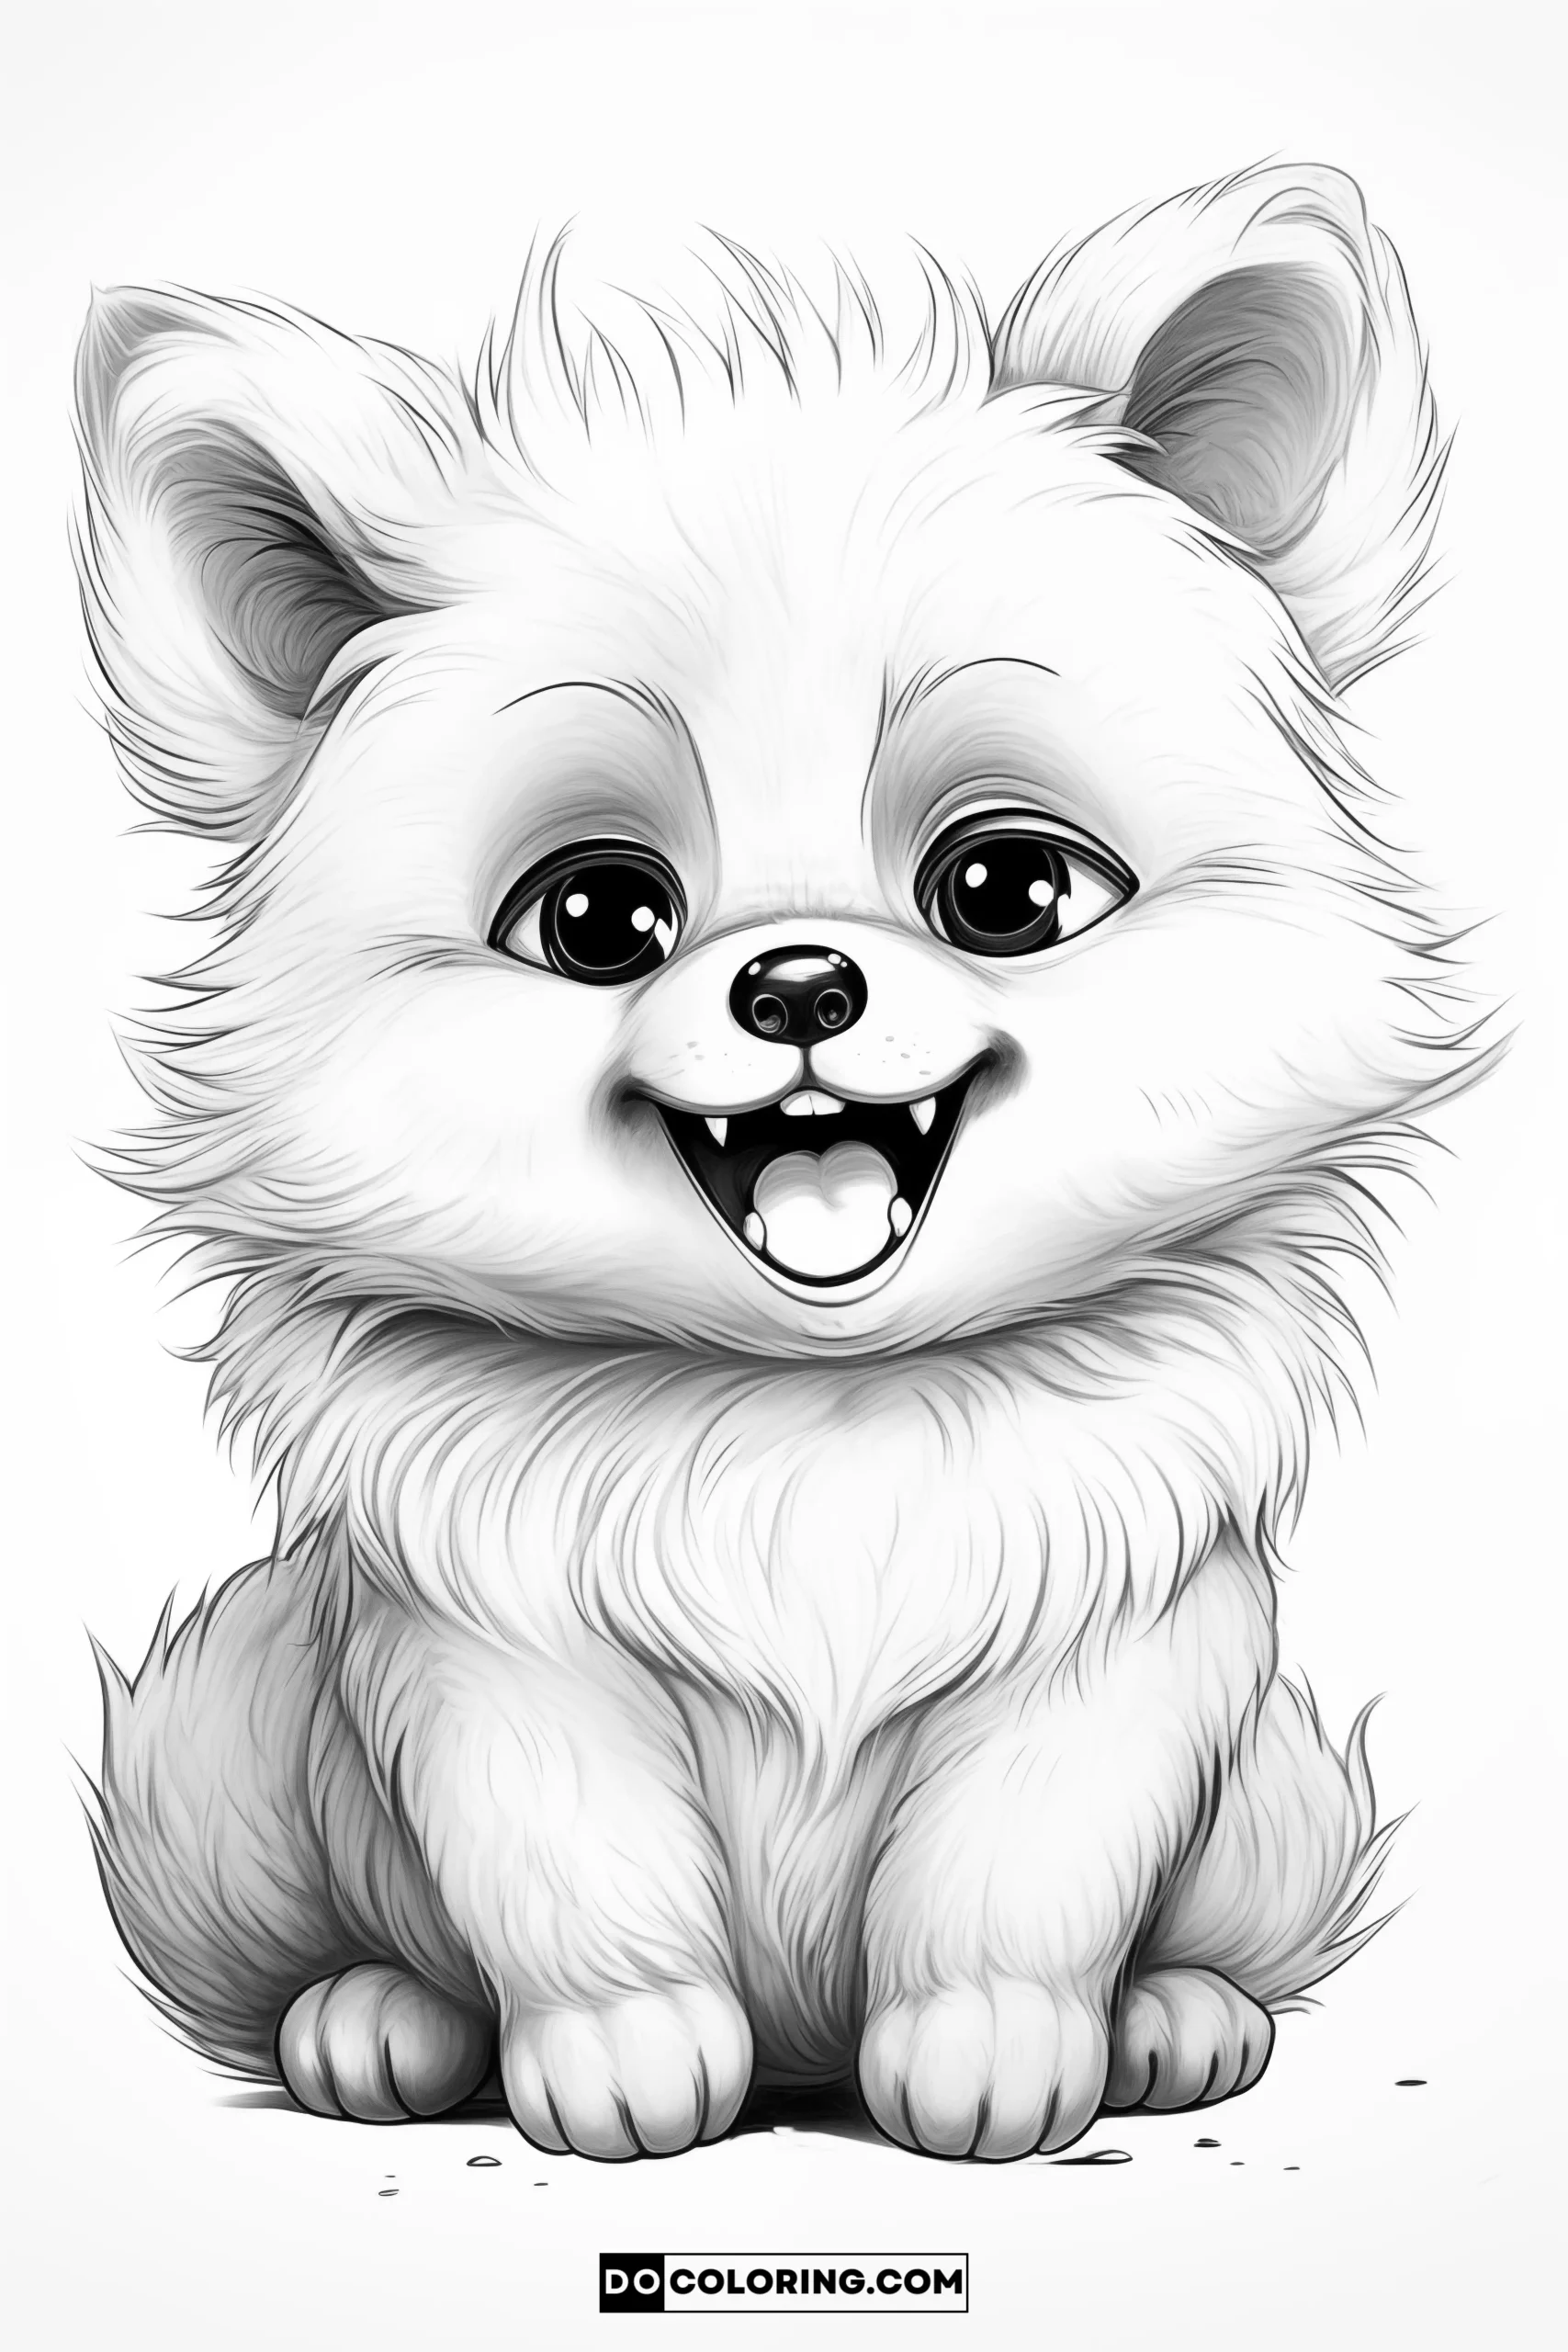 A joyous baby fox illustration, perfect for adults looking for coloring.